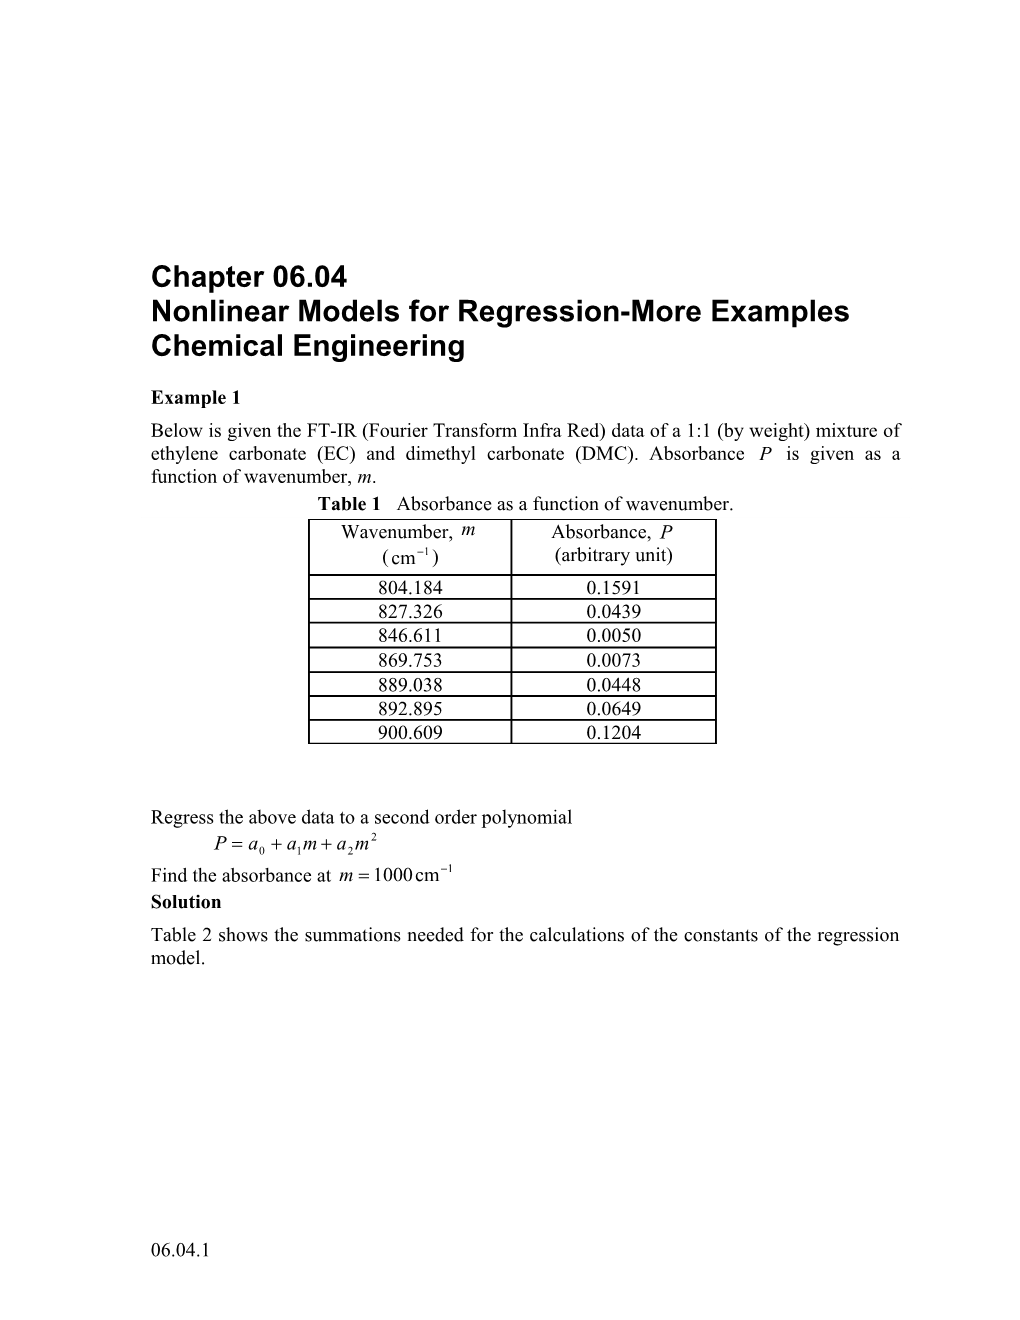 Nonlinear Models for Regression-More Examples: Chemical Engineering